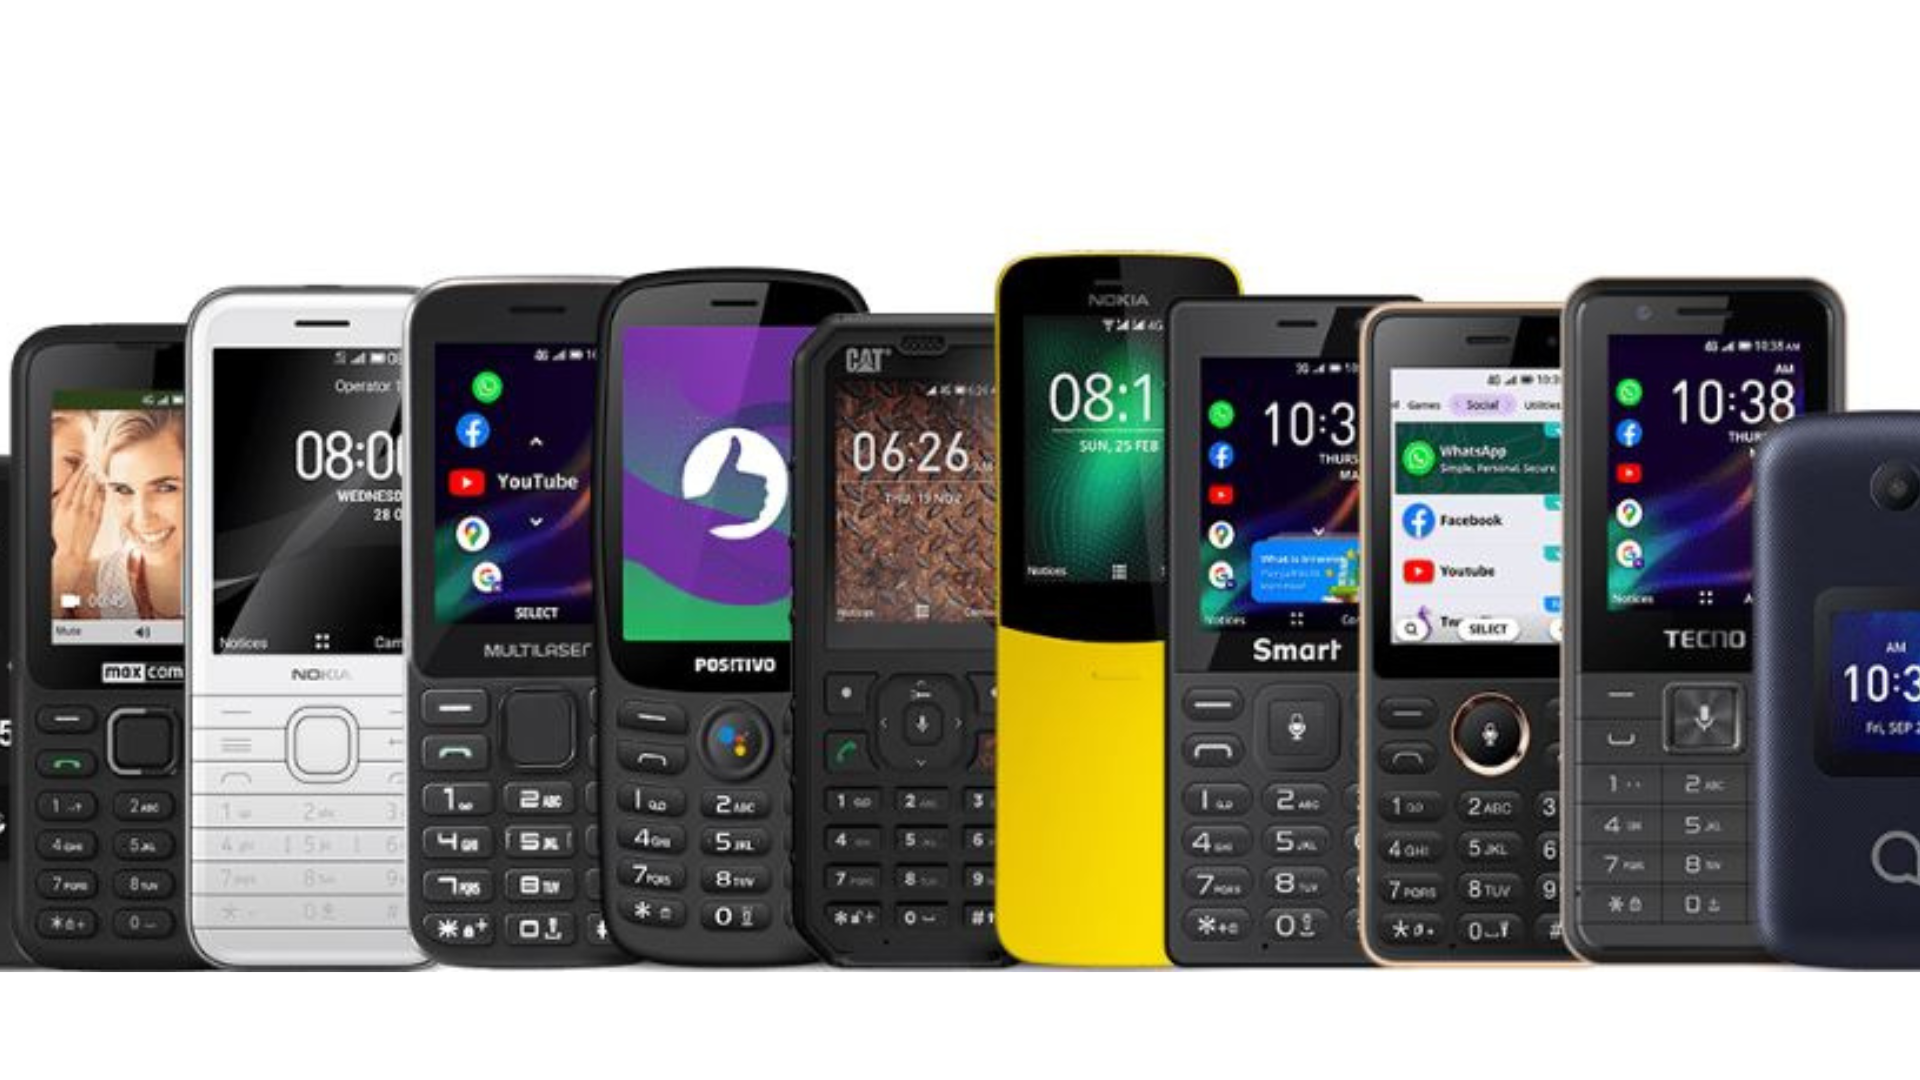 Variety of KaiOS phones in different colors and designs on a shelf, showcasing affordability